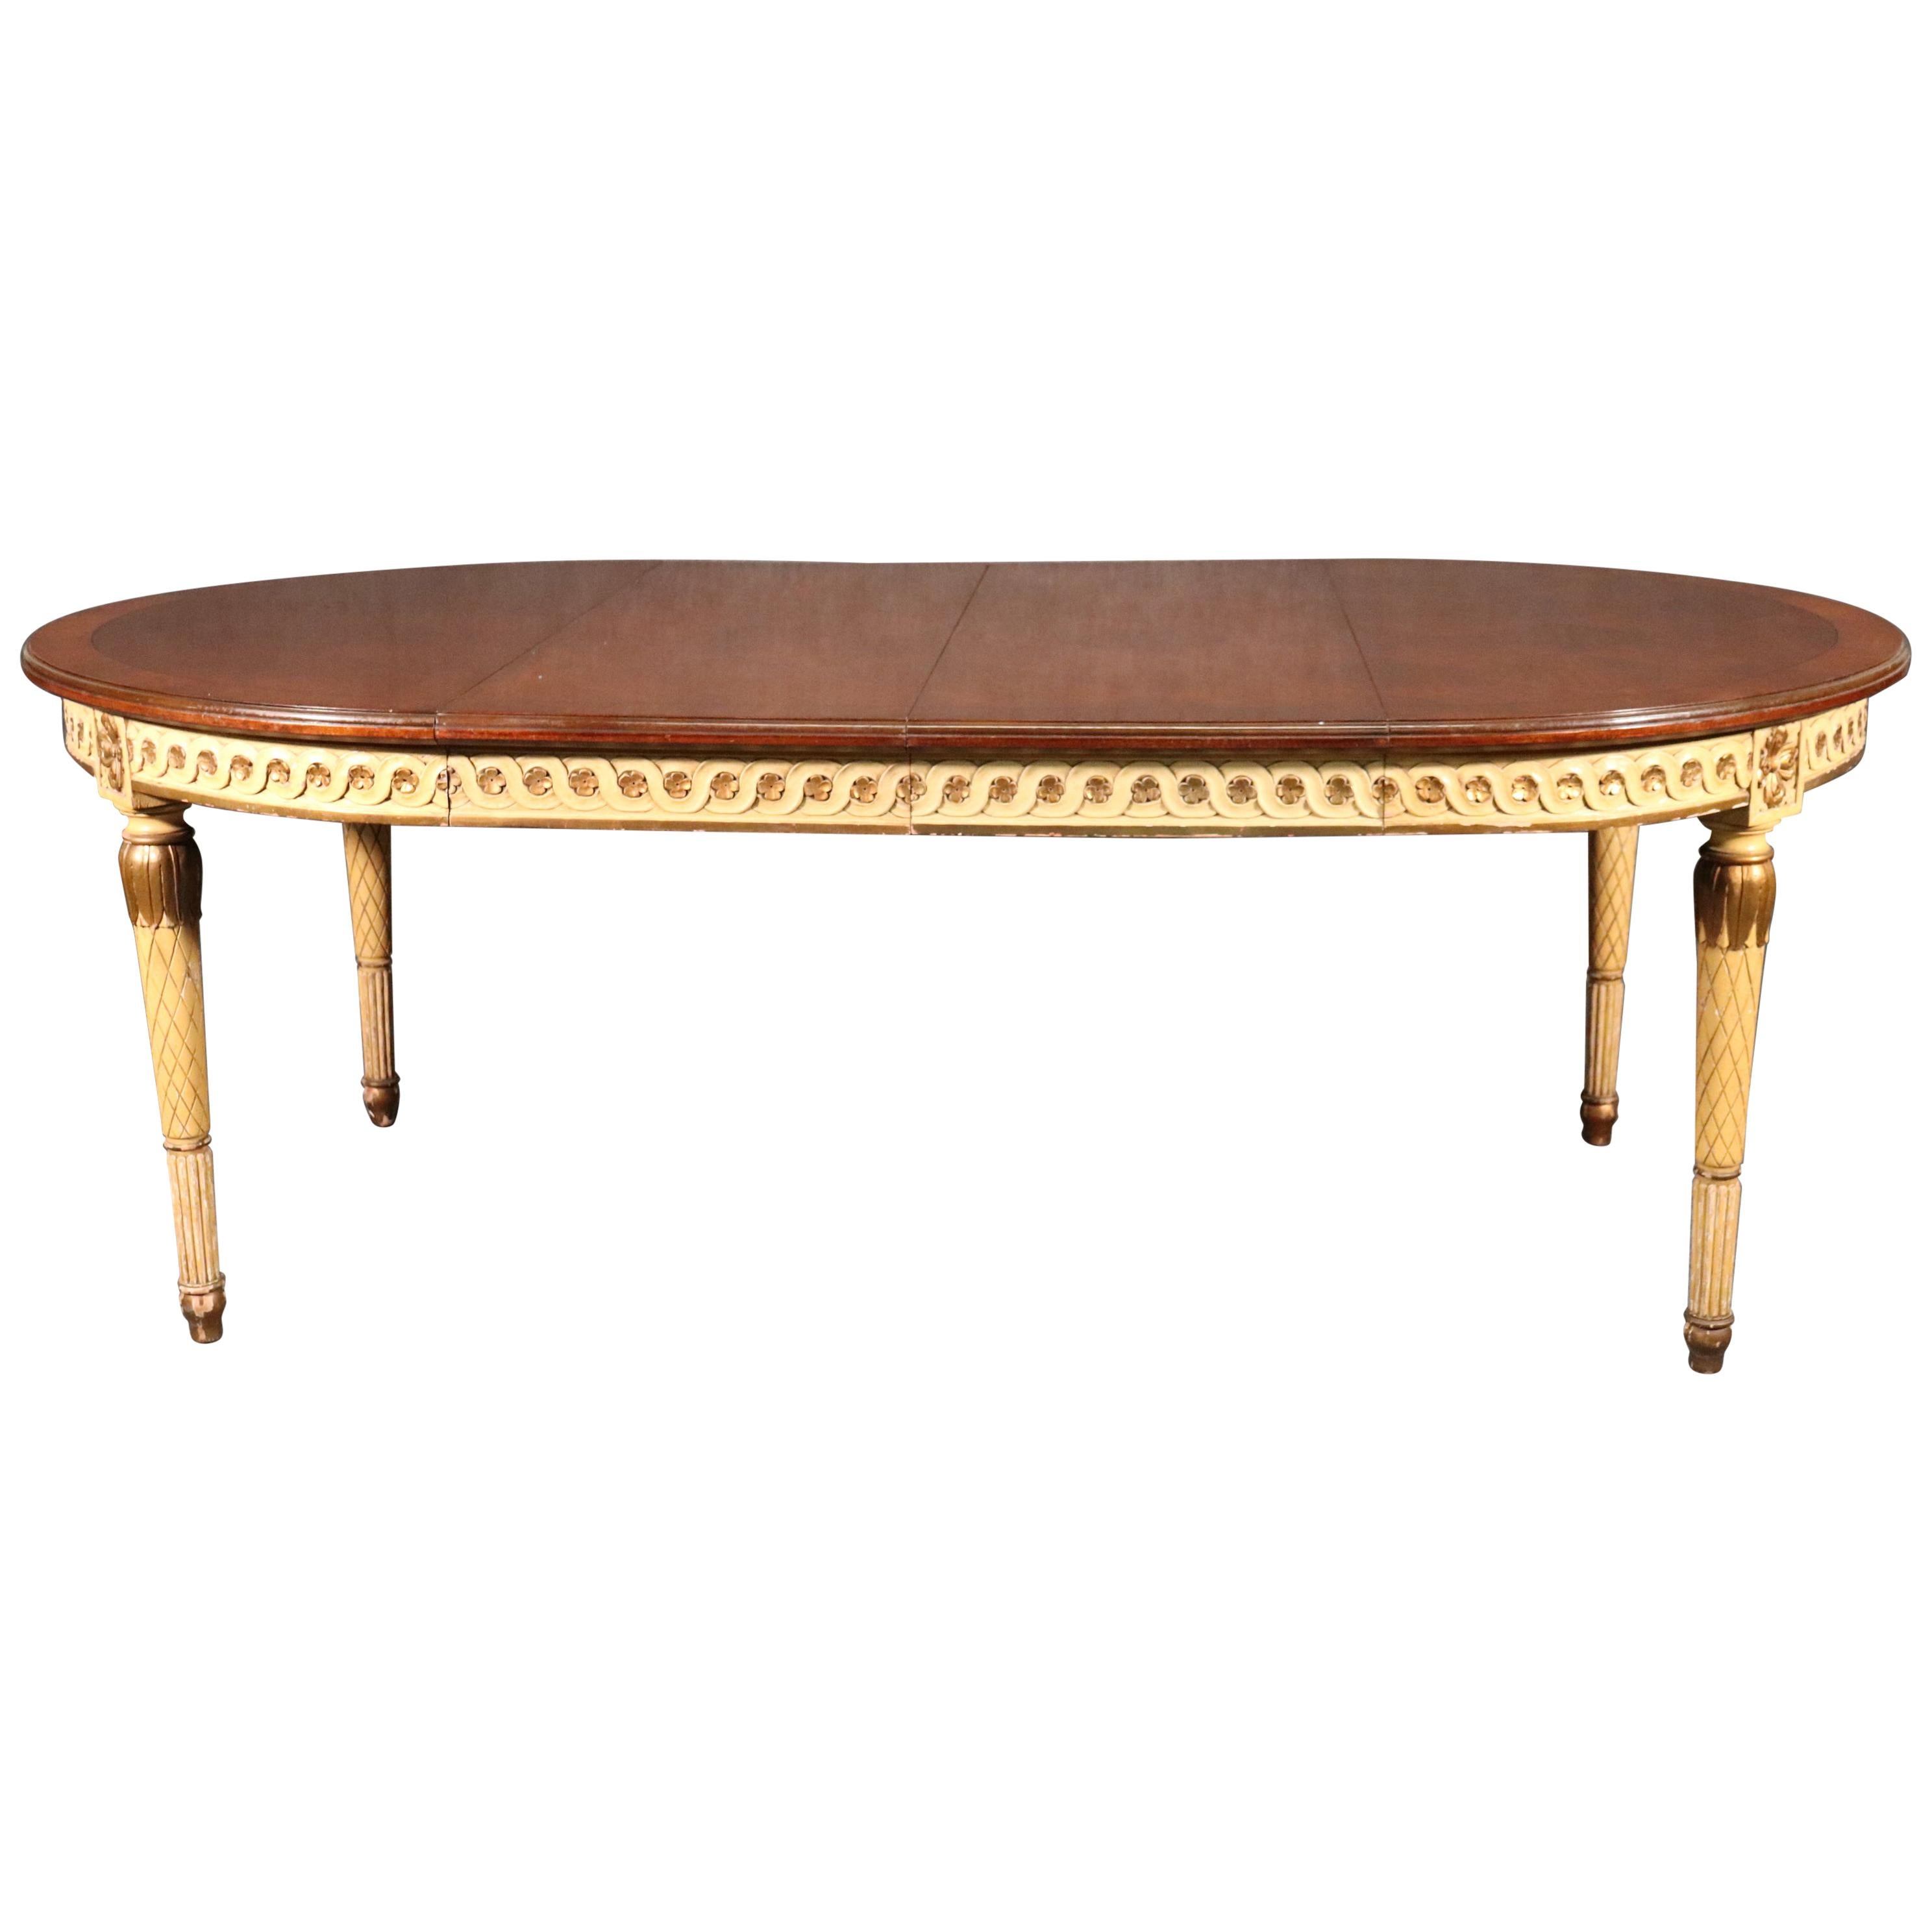 French Crème Paint and Gilded Parquet Top Round to Oval Louis XVI Dining Table